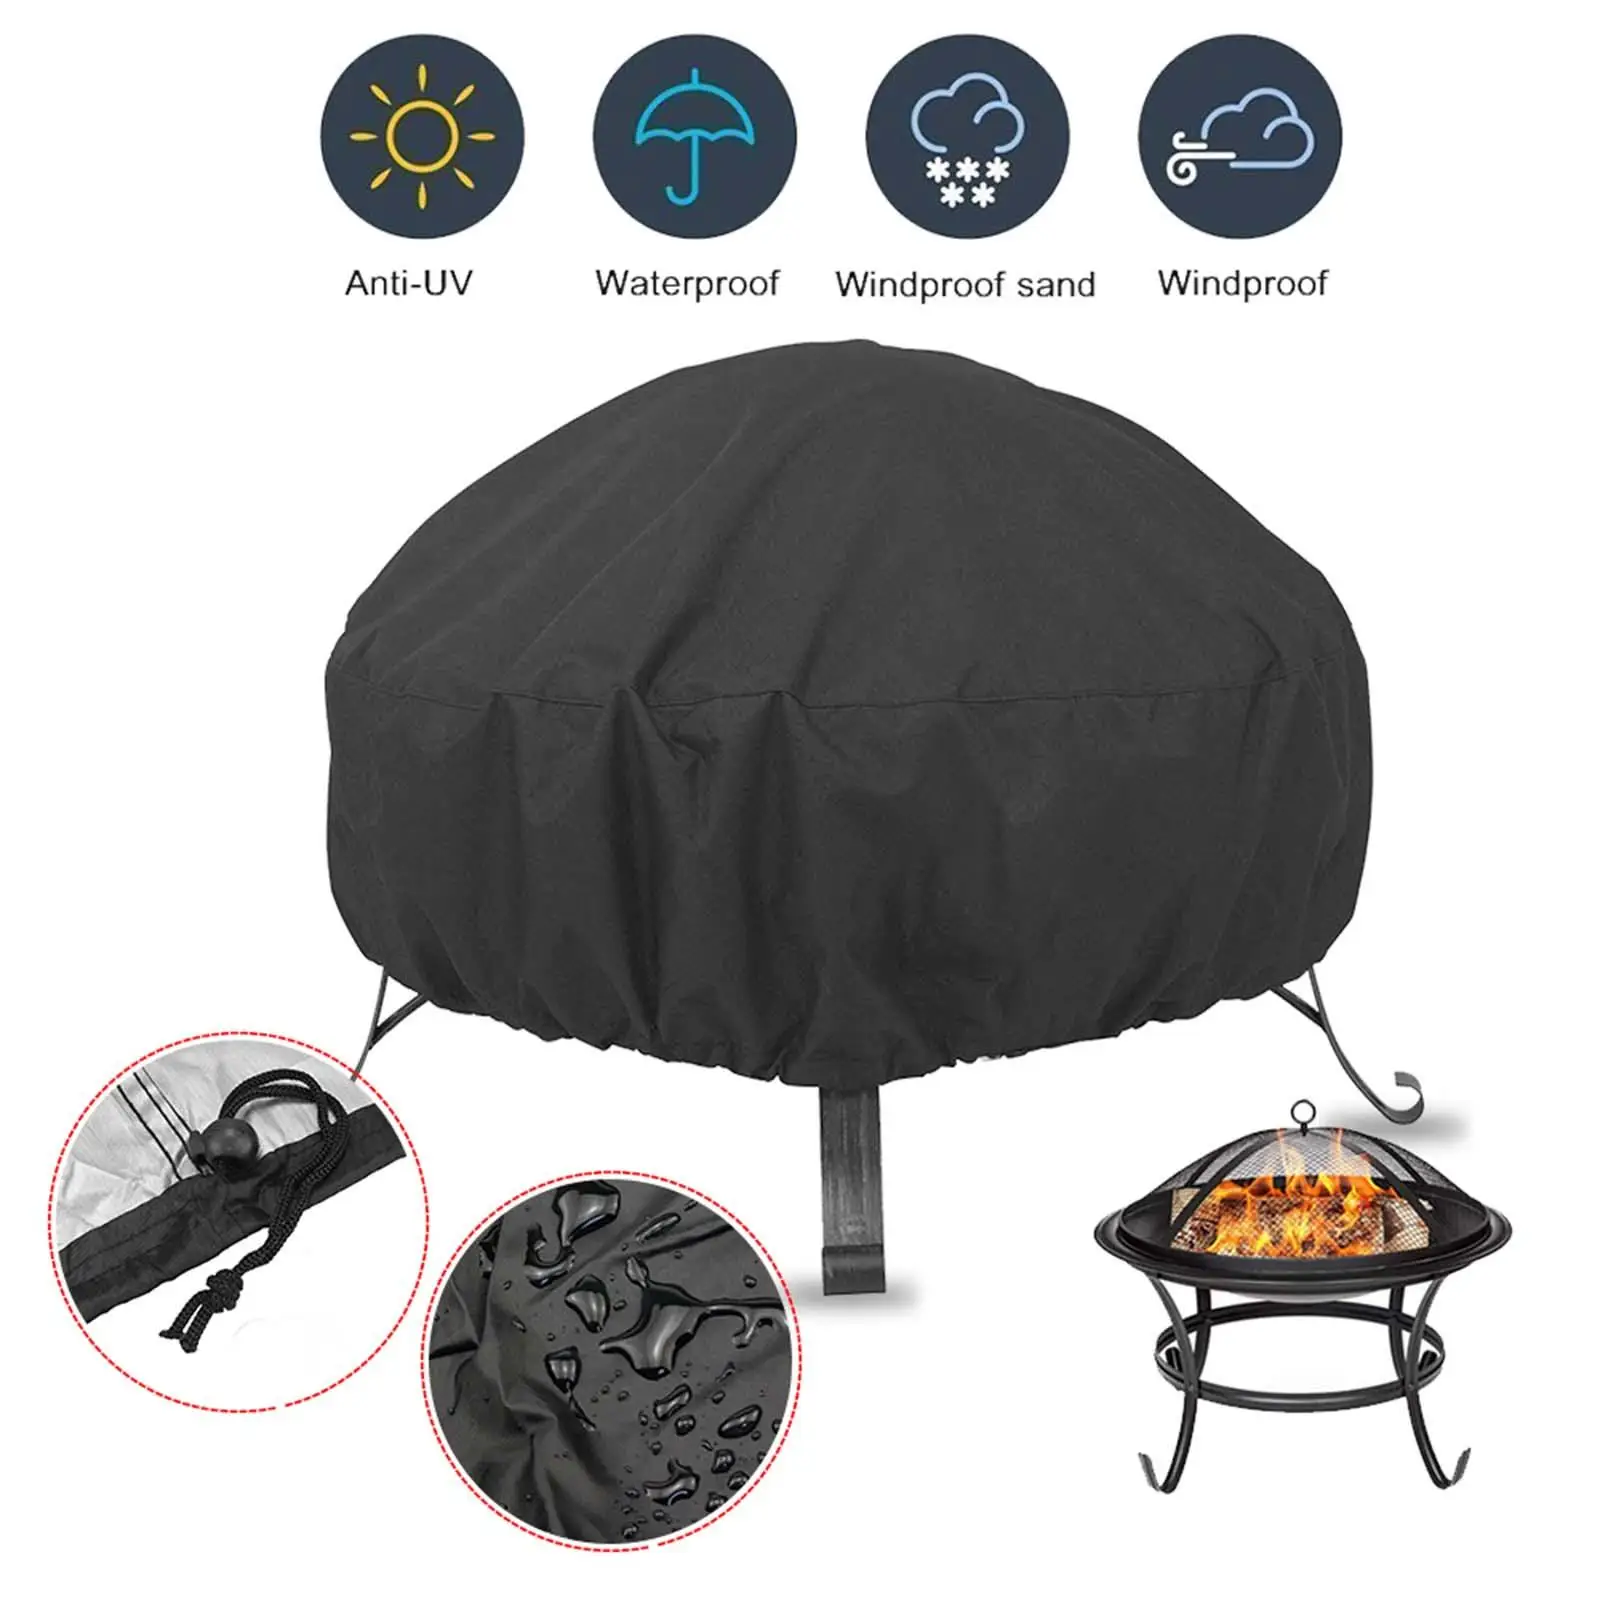 Breathable Outdoors Fire Pit Cover Oxford Cloth Waterproof BBQ Cover Outdoor Garden Brazier Cover for Indoor Outside Barbecue